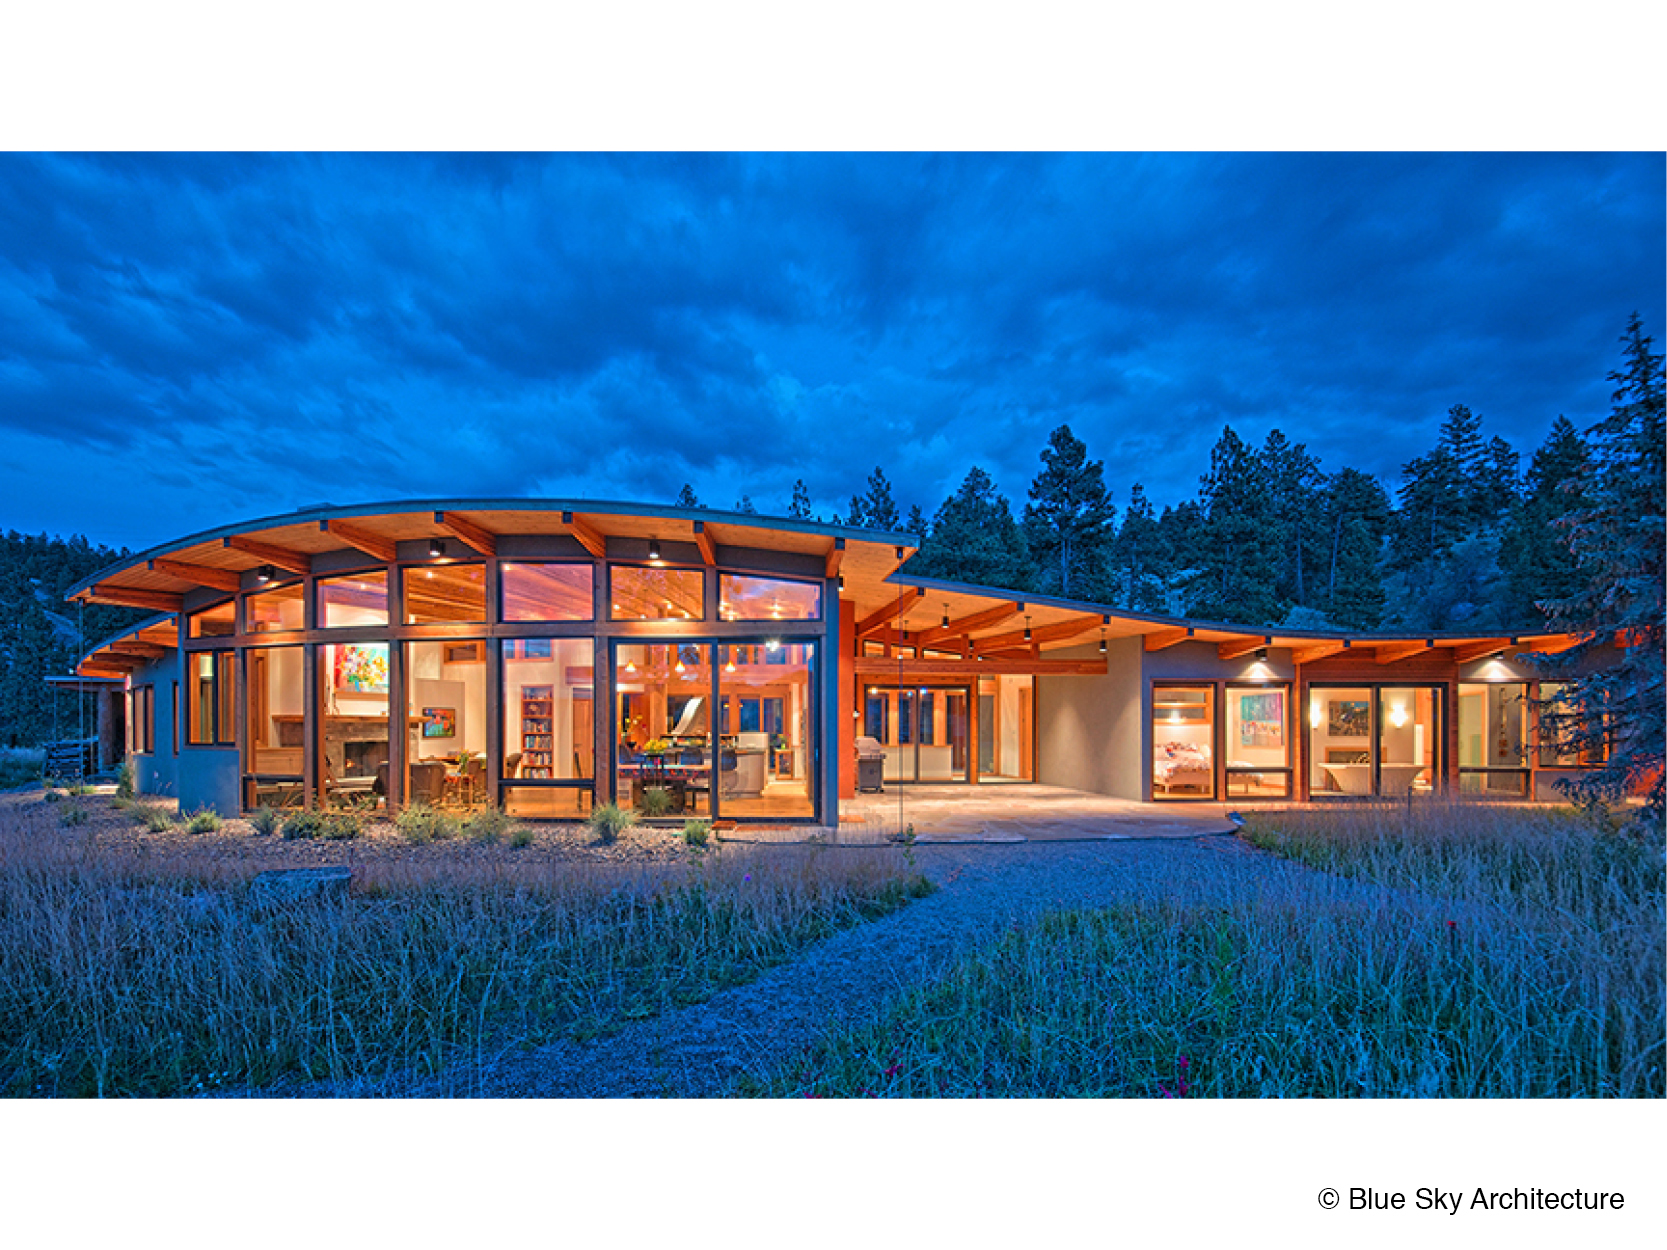 Lakefront heavy timber architecture for a residence